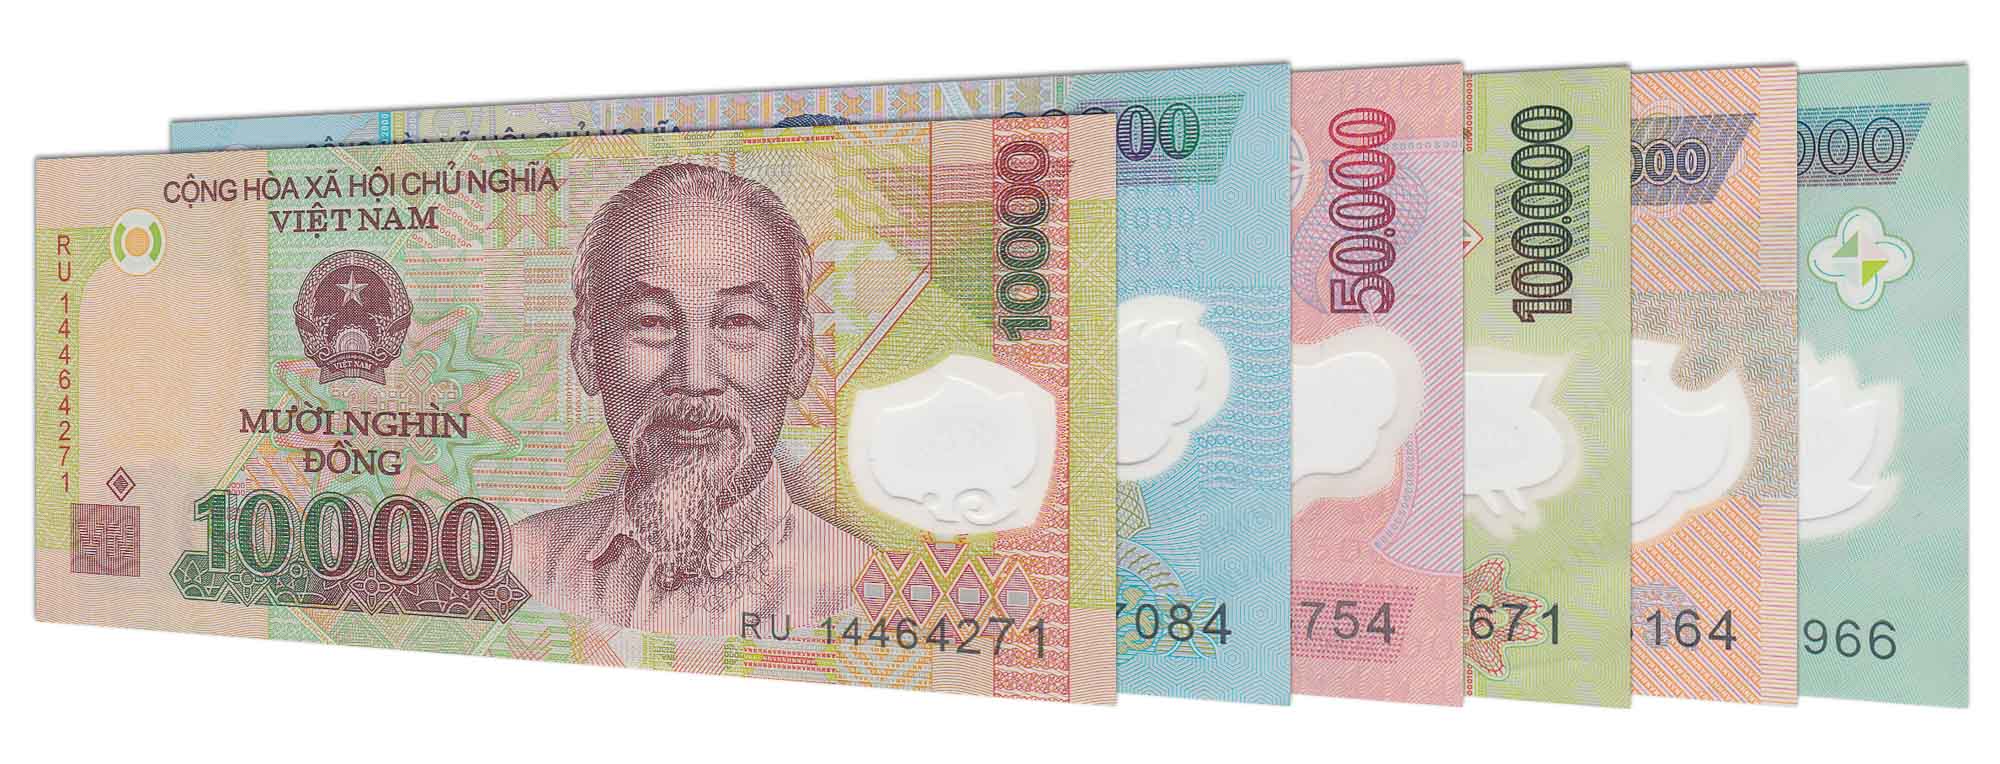 current Vietnamese Dong banknotes.